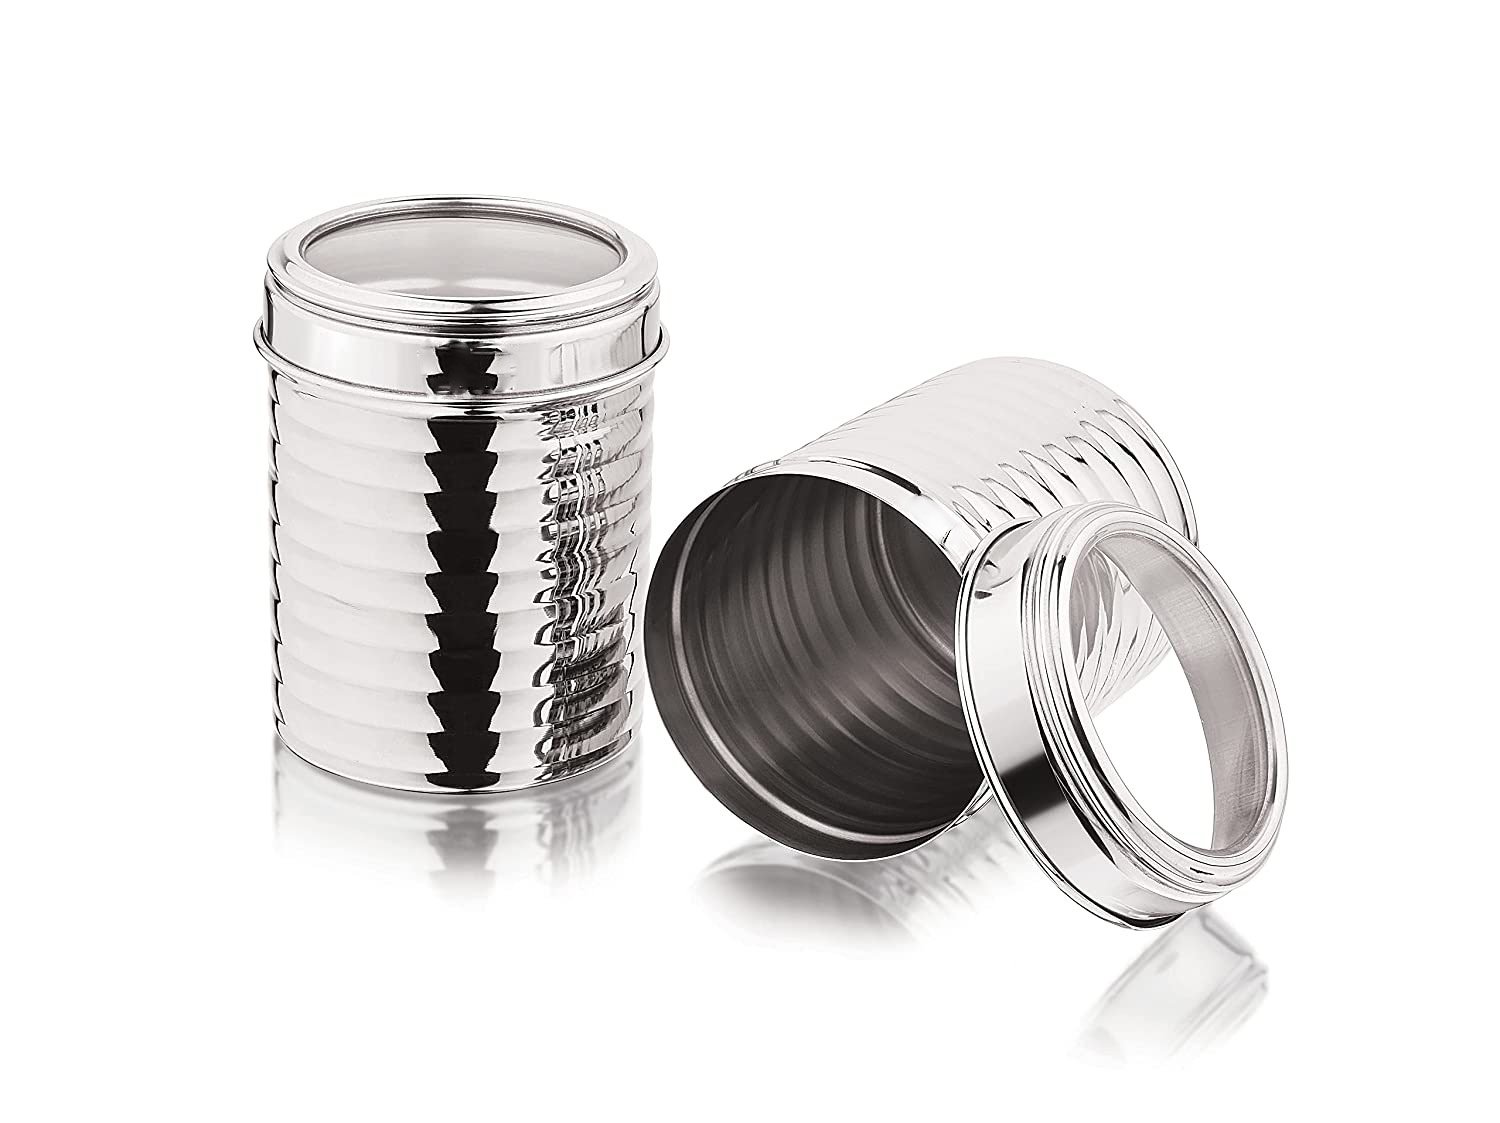 2 pcs of stainless steel multipurpose storage canister with top see through lid on white background